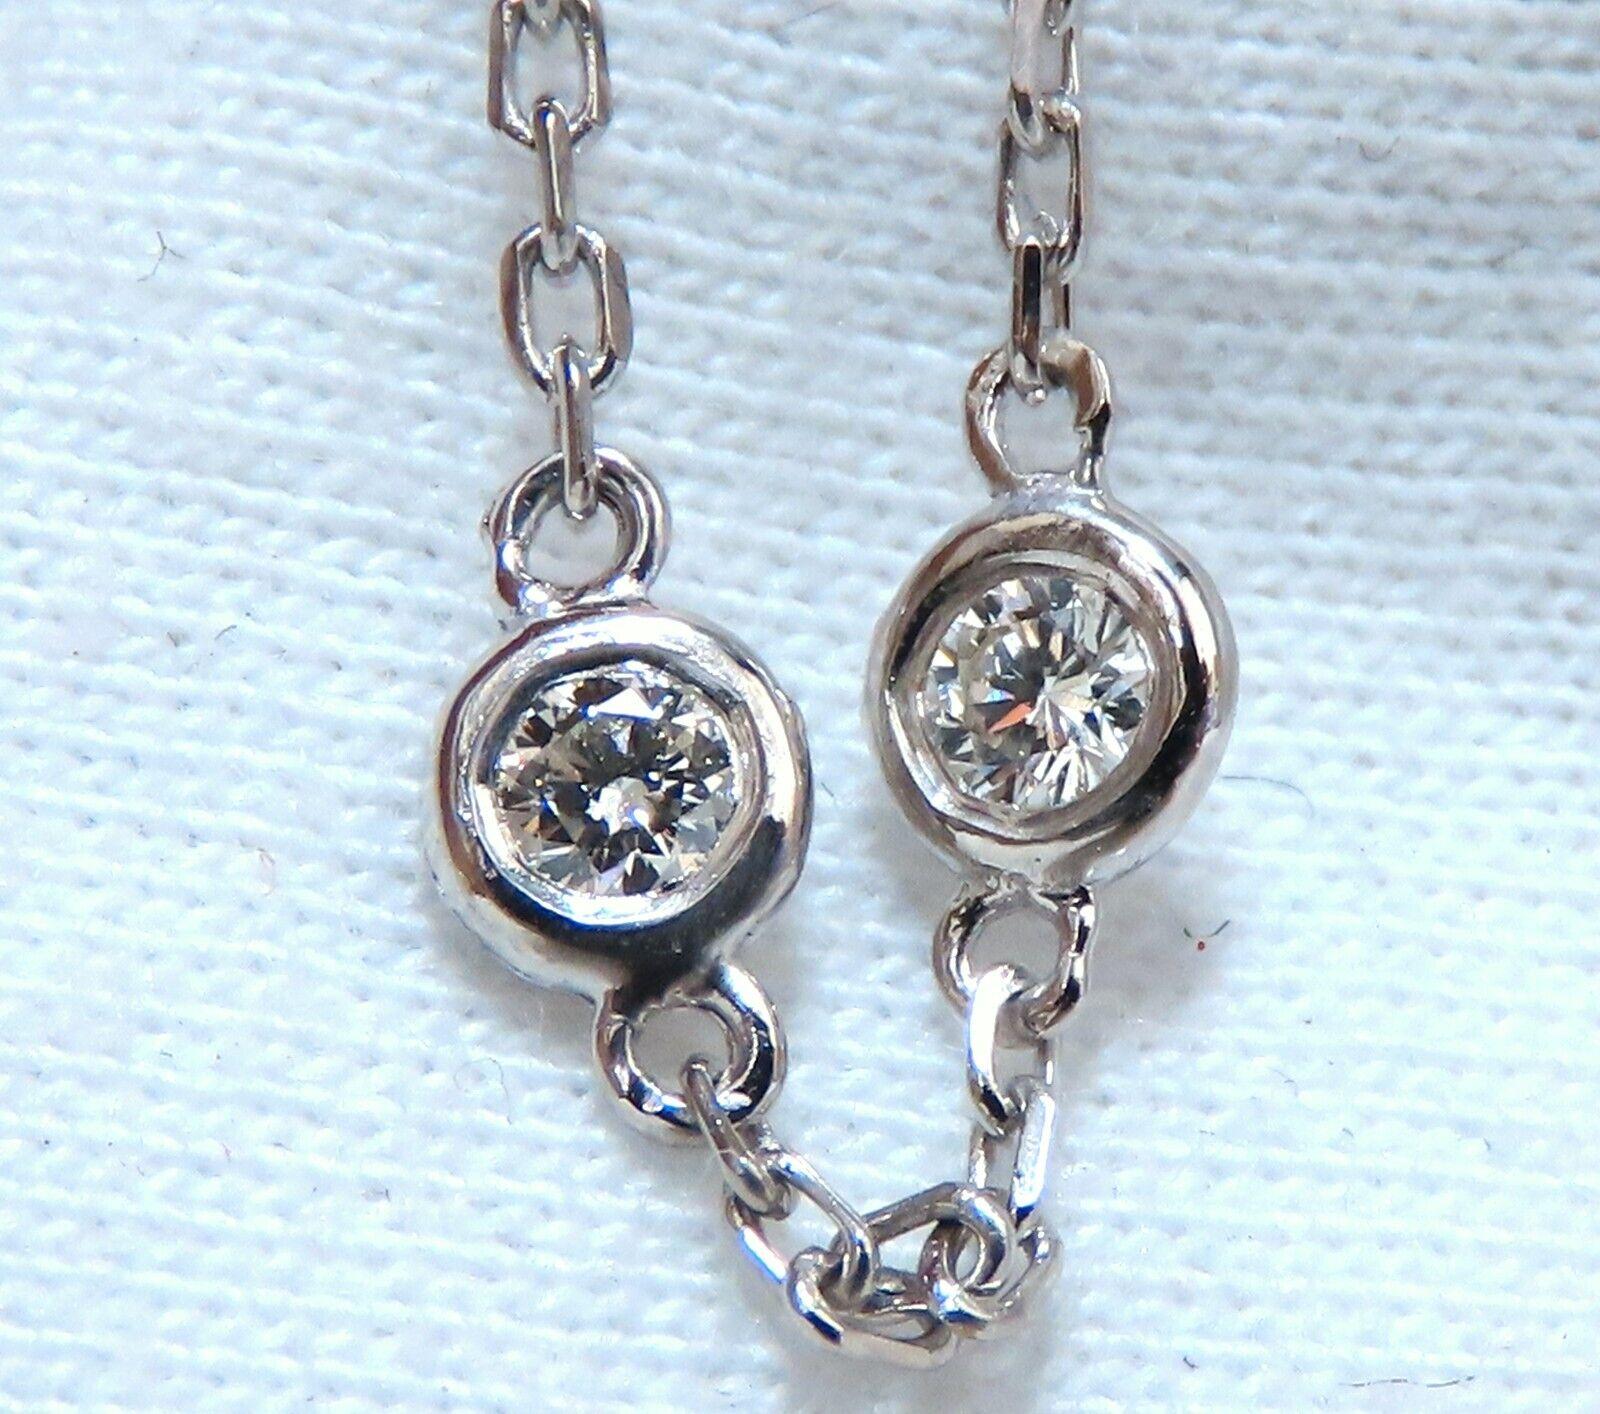 3.45ct. Diamonds Station By Yard Necklace.
Double Wrap Version.


Natural Rounds, Full cuts.
G colors

Vs-2 clarity.


63 diamonds total count.

Total Necklace Length: 36 Inch.

14Kt White gold 

9 Grams

Diamonds mounted flush / smooth